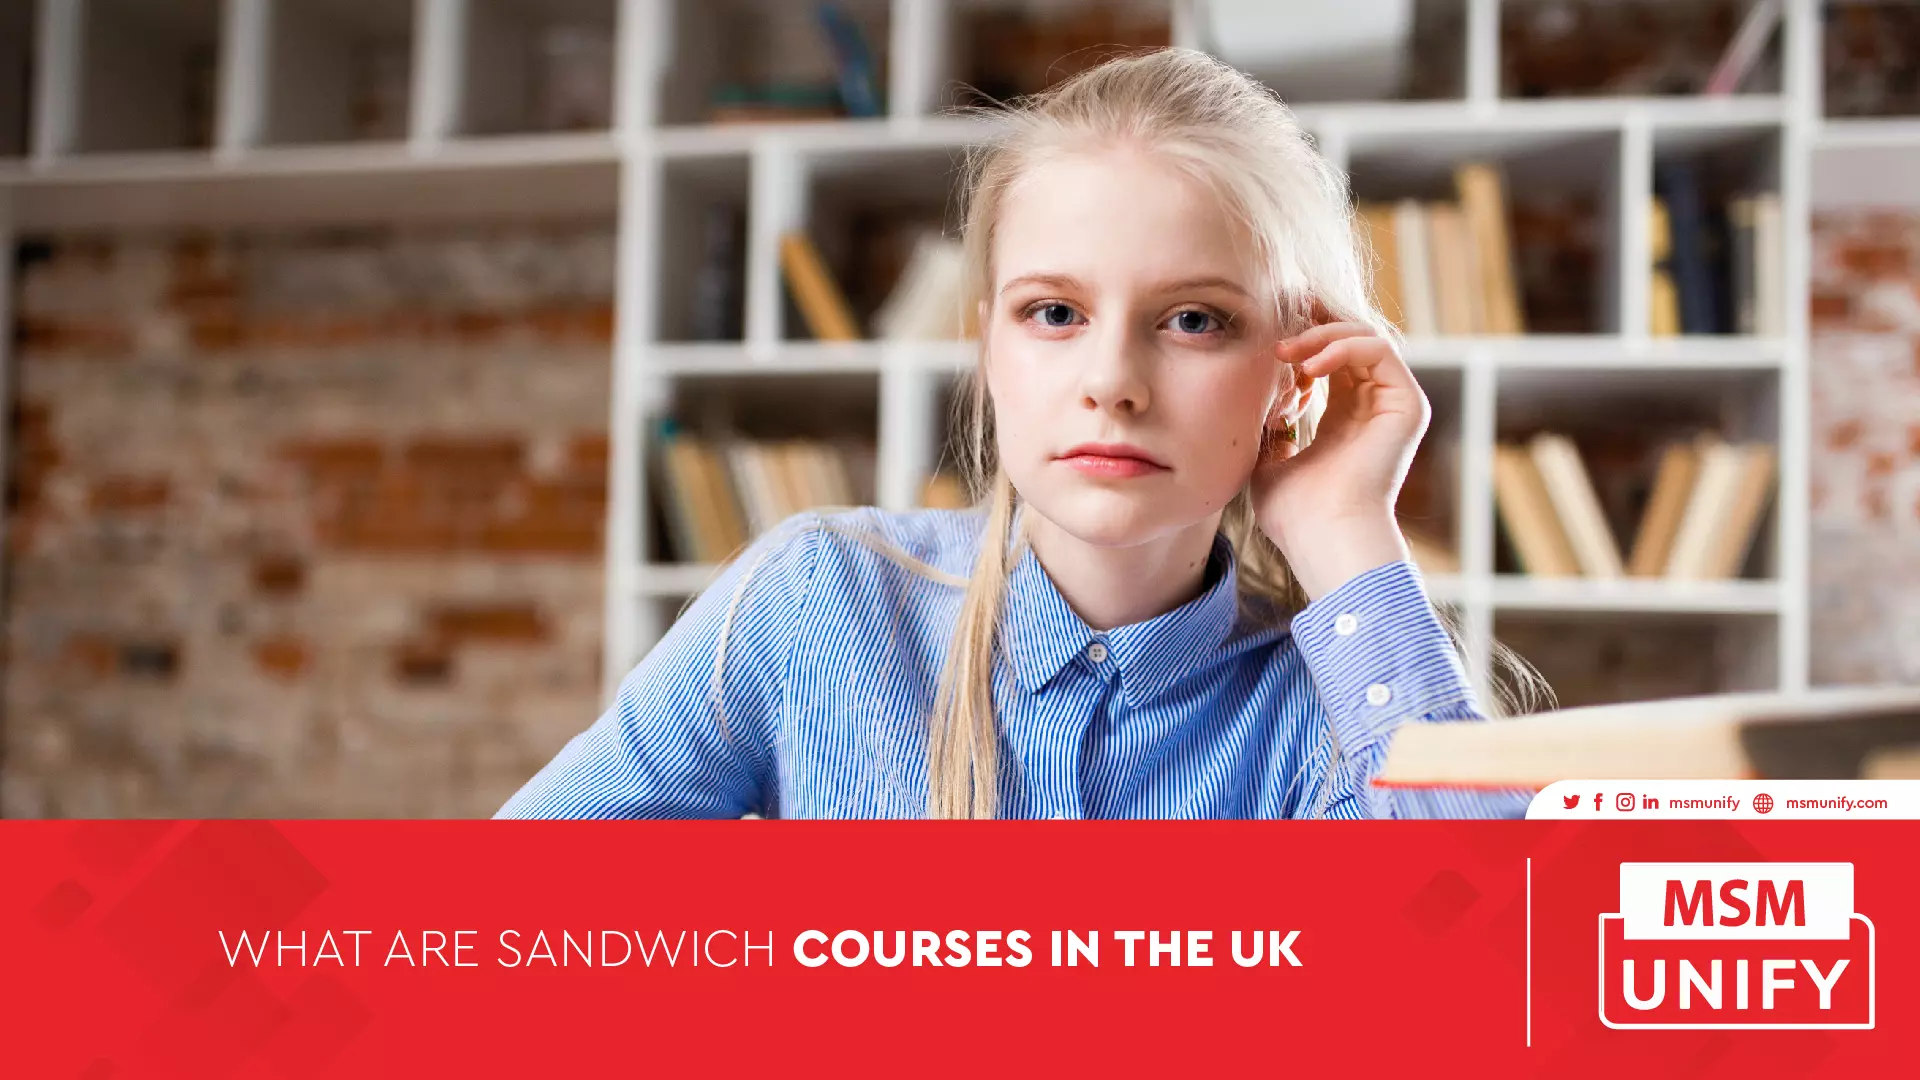 110722 MSM Unify  What are Sandwich courses in the UK 01